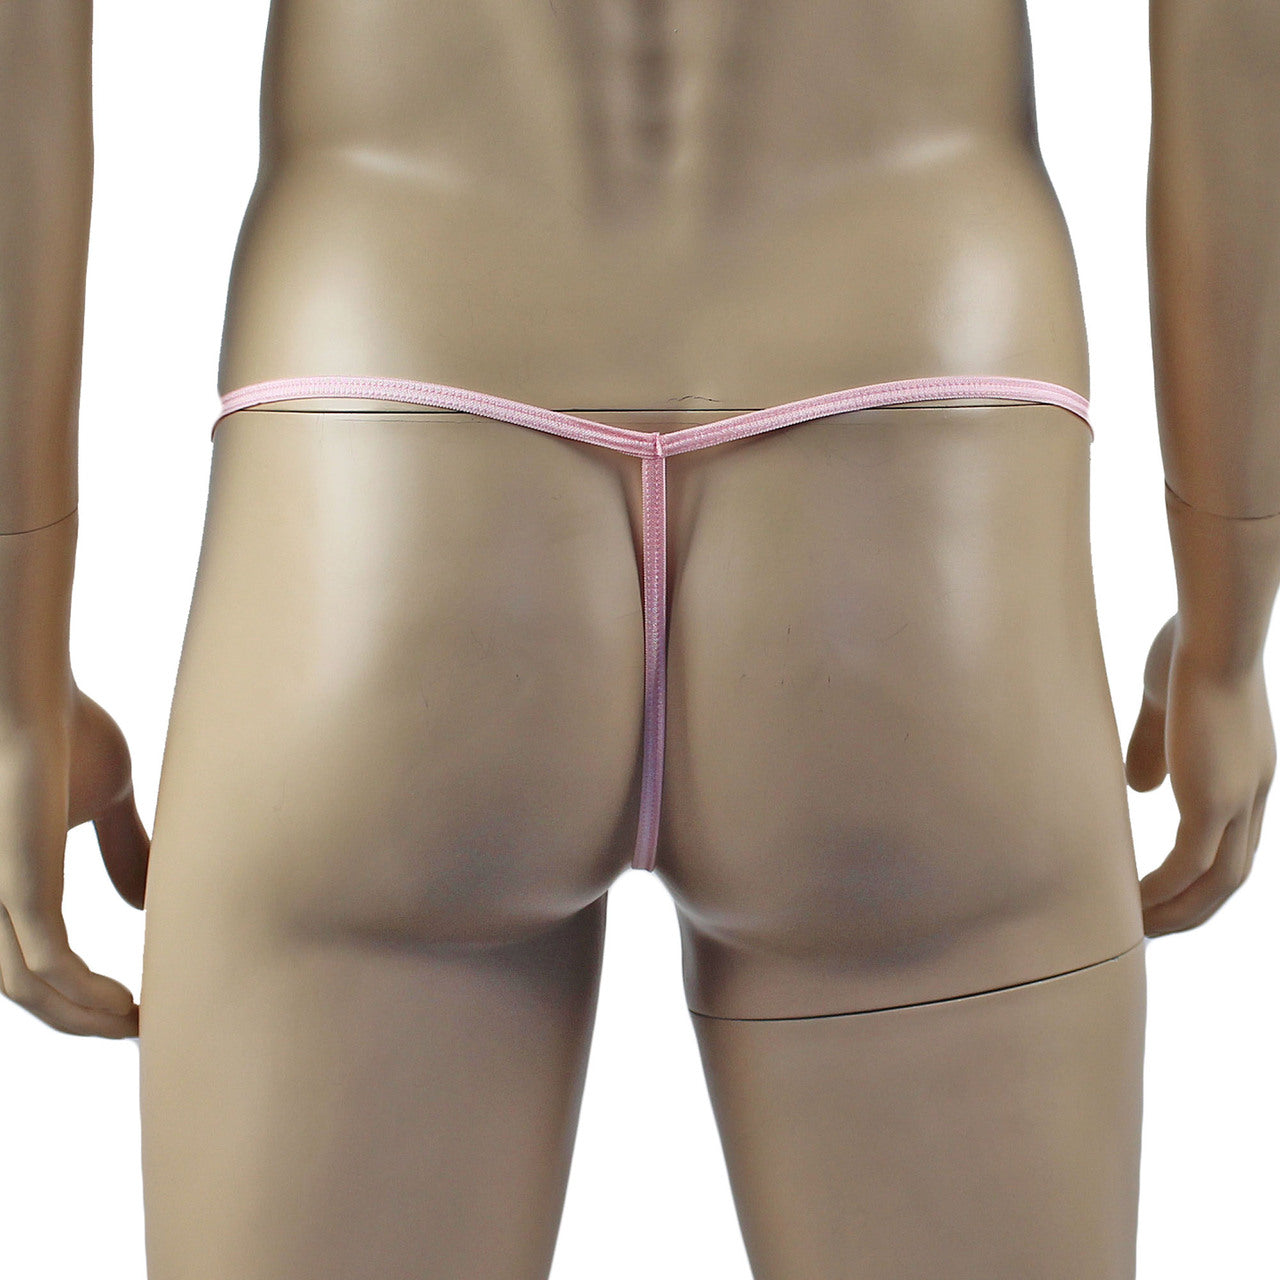 Mens Mick Keep It Simple Lycra Pouch G string Black with Thin Elastic Light Pink